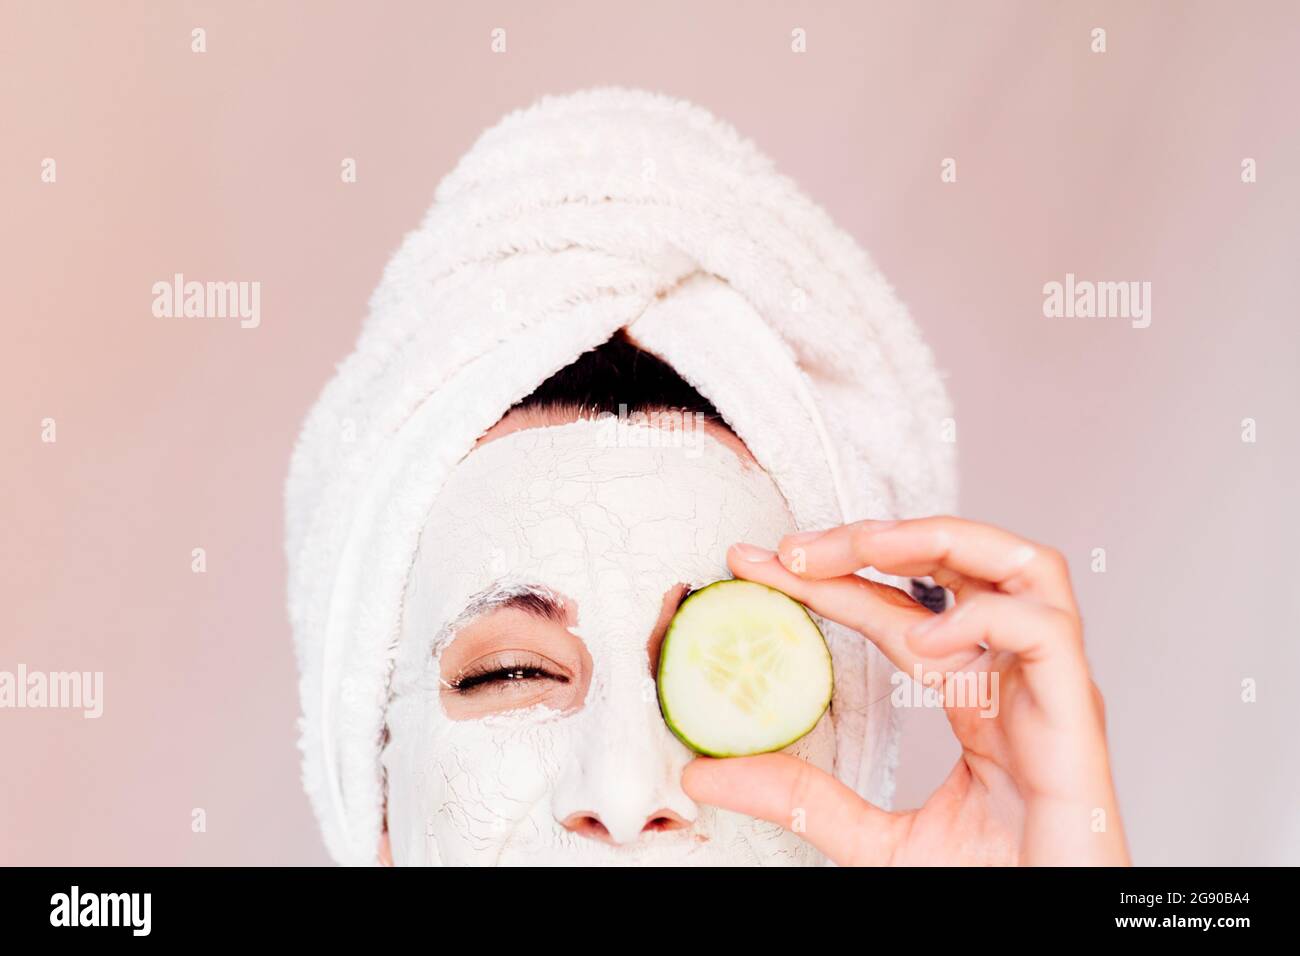 Young woman with beauty face mask covering eye with cucumber slice Stock Photo